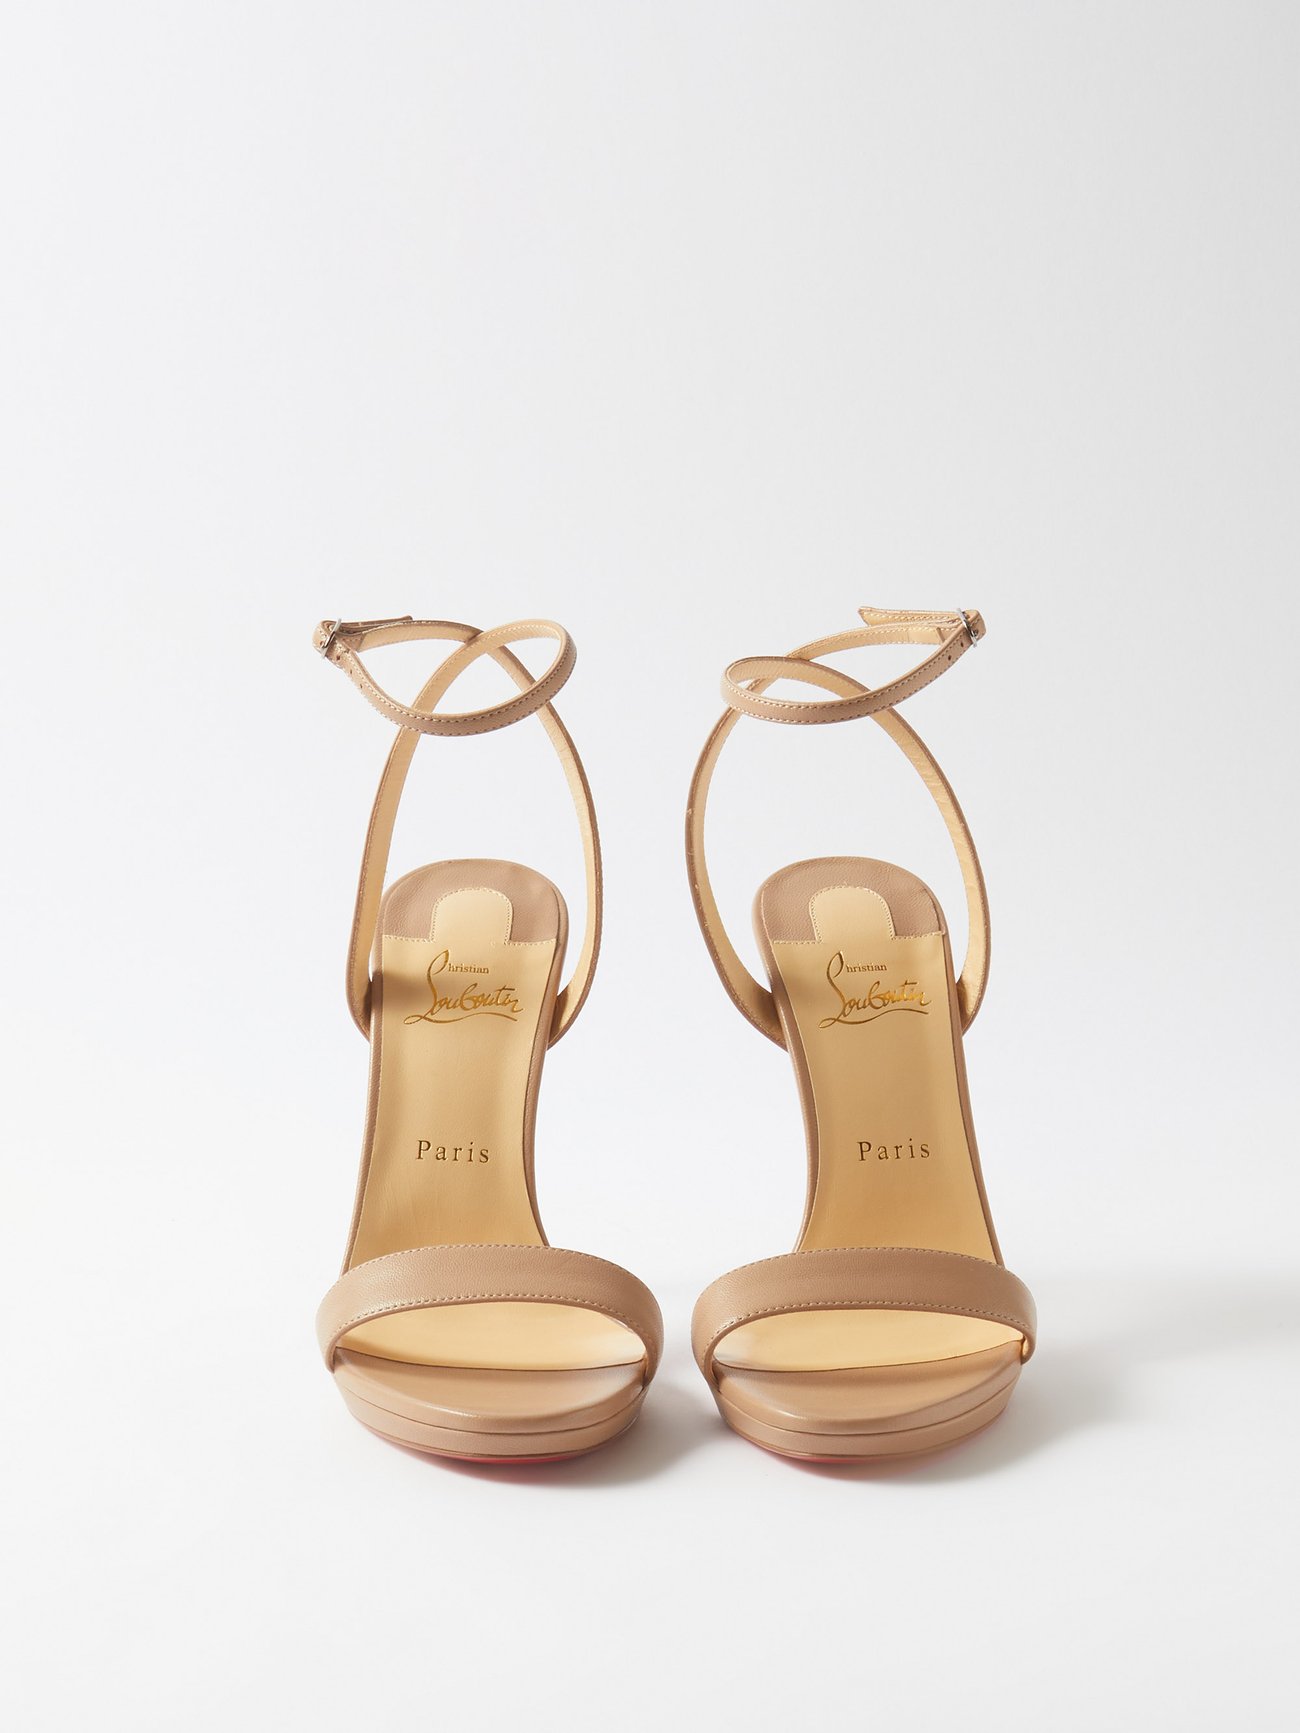 Loubi Queen - 120 mm Sandals - Nappa leather - Blush - Christian